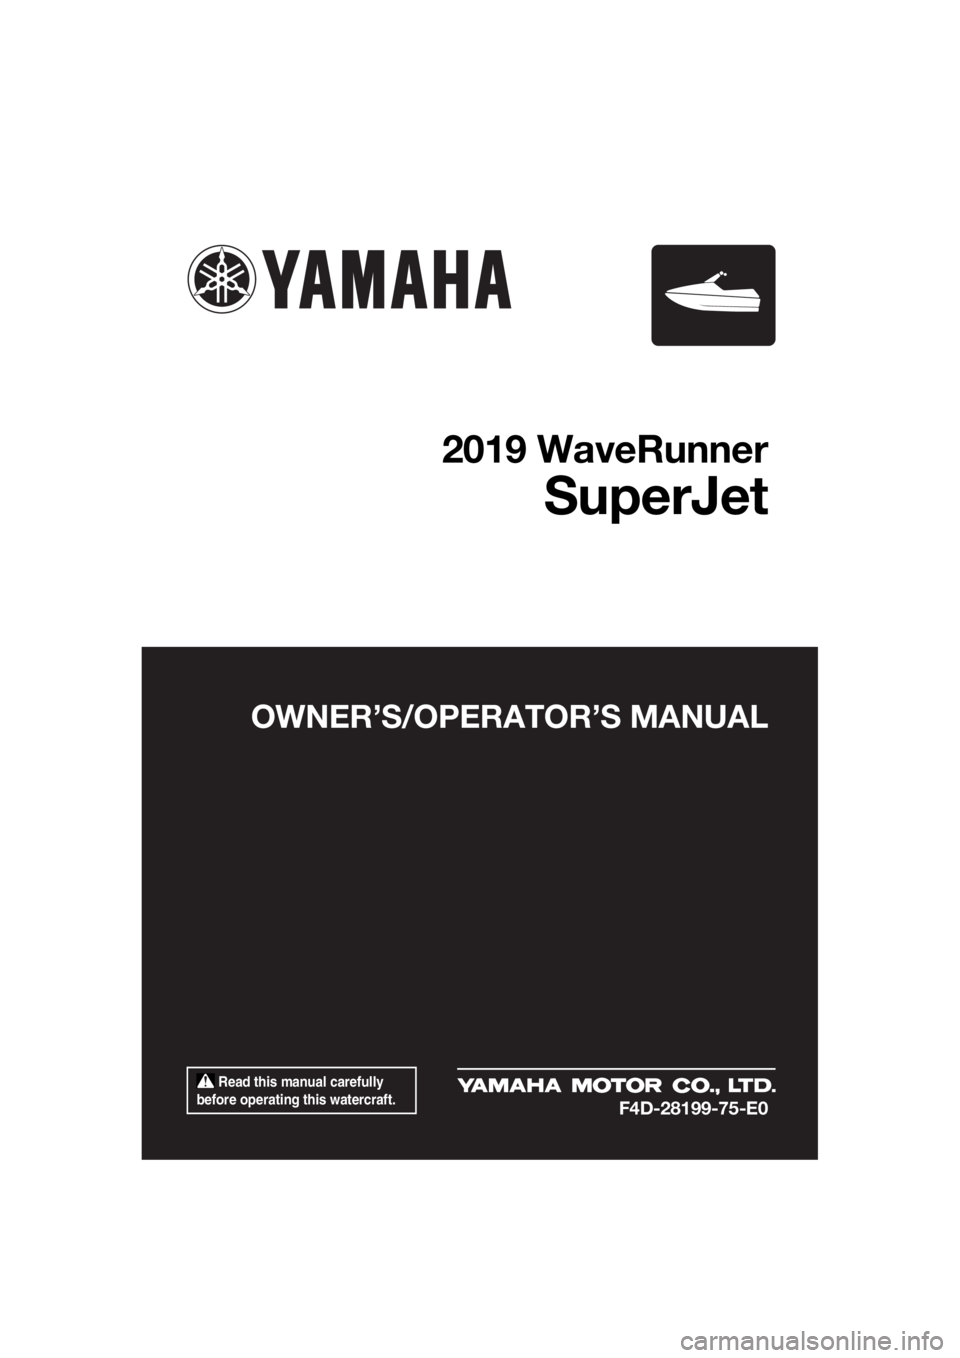 YAMAHA SUPERJET 2019  Owners Manual  Read this manual carefully 
before operating this watercraft.
OWNER’S/OPERATOR’S MANUAL
2019 WaveRunner
SuperJet
F4D-28199-75-E0
UF4D75E0.book  Page 1  Monday, March 19, 2018  3:02 PM 